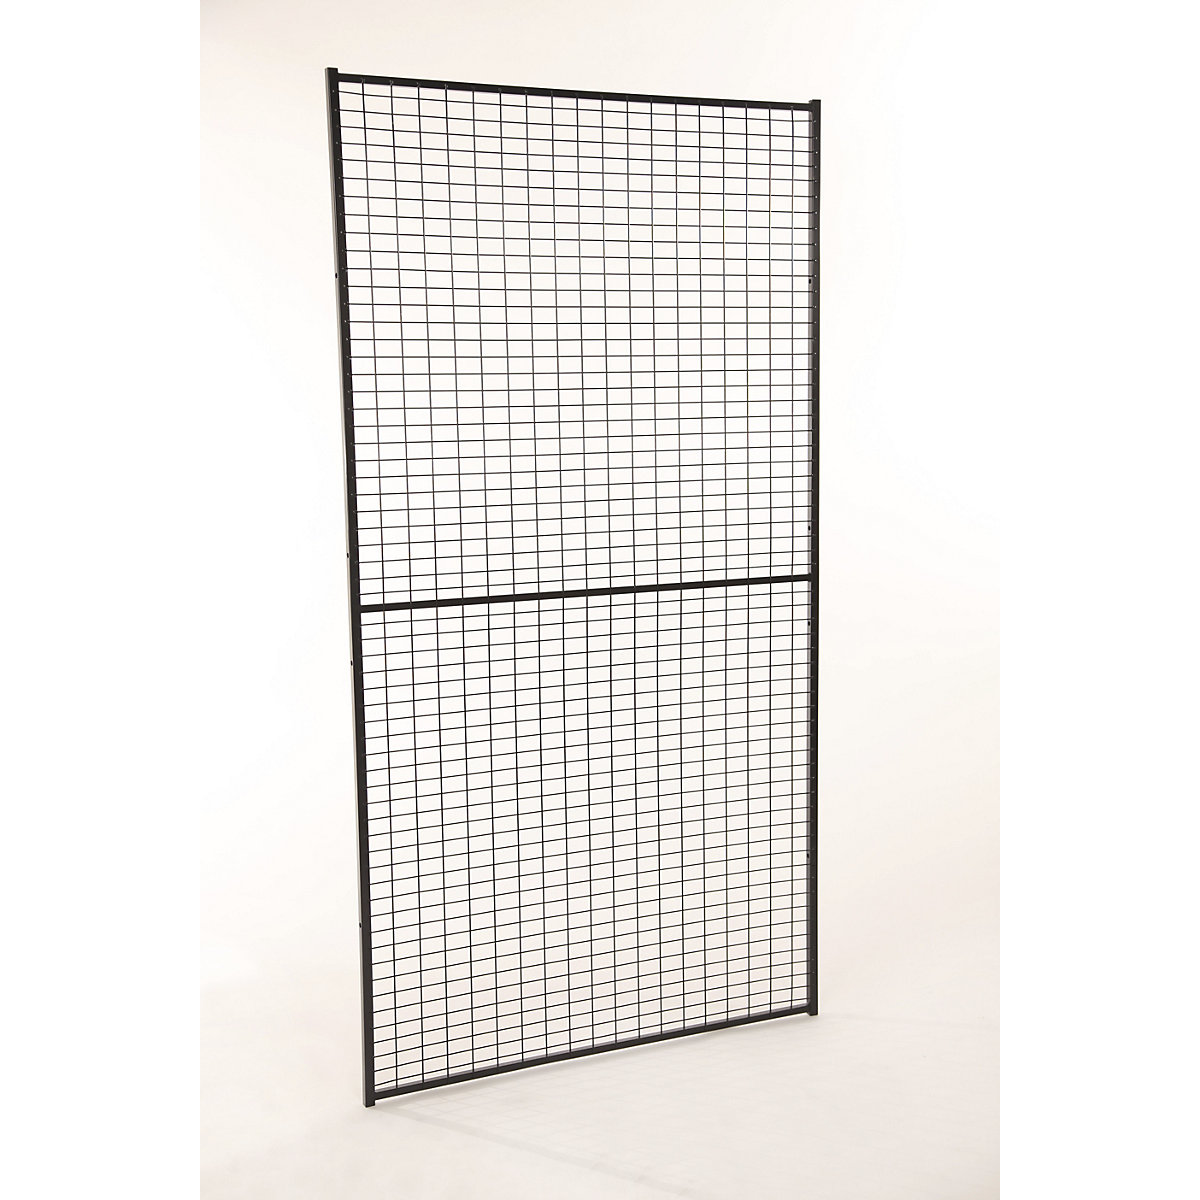 X-GUARD LITE machine protective fencing, wall section – Axelent, height 1900 mm, width 500 mm-7